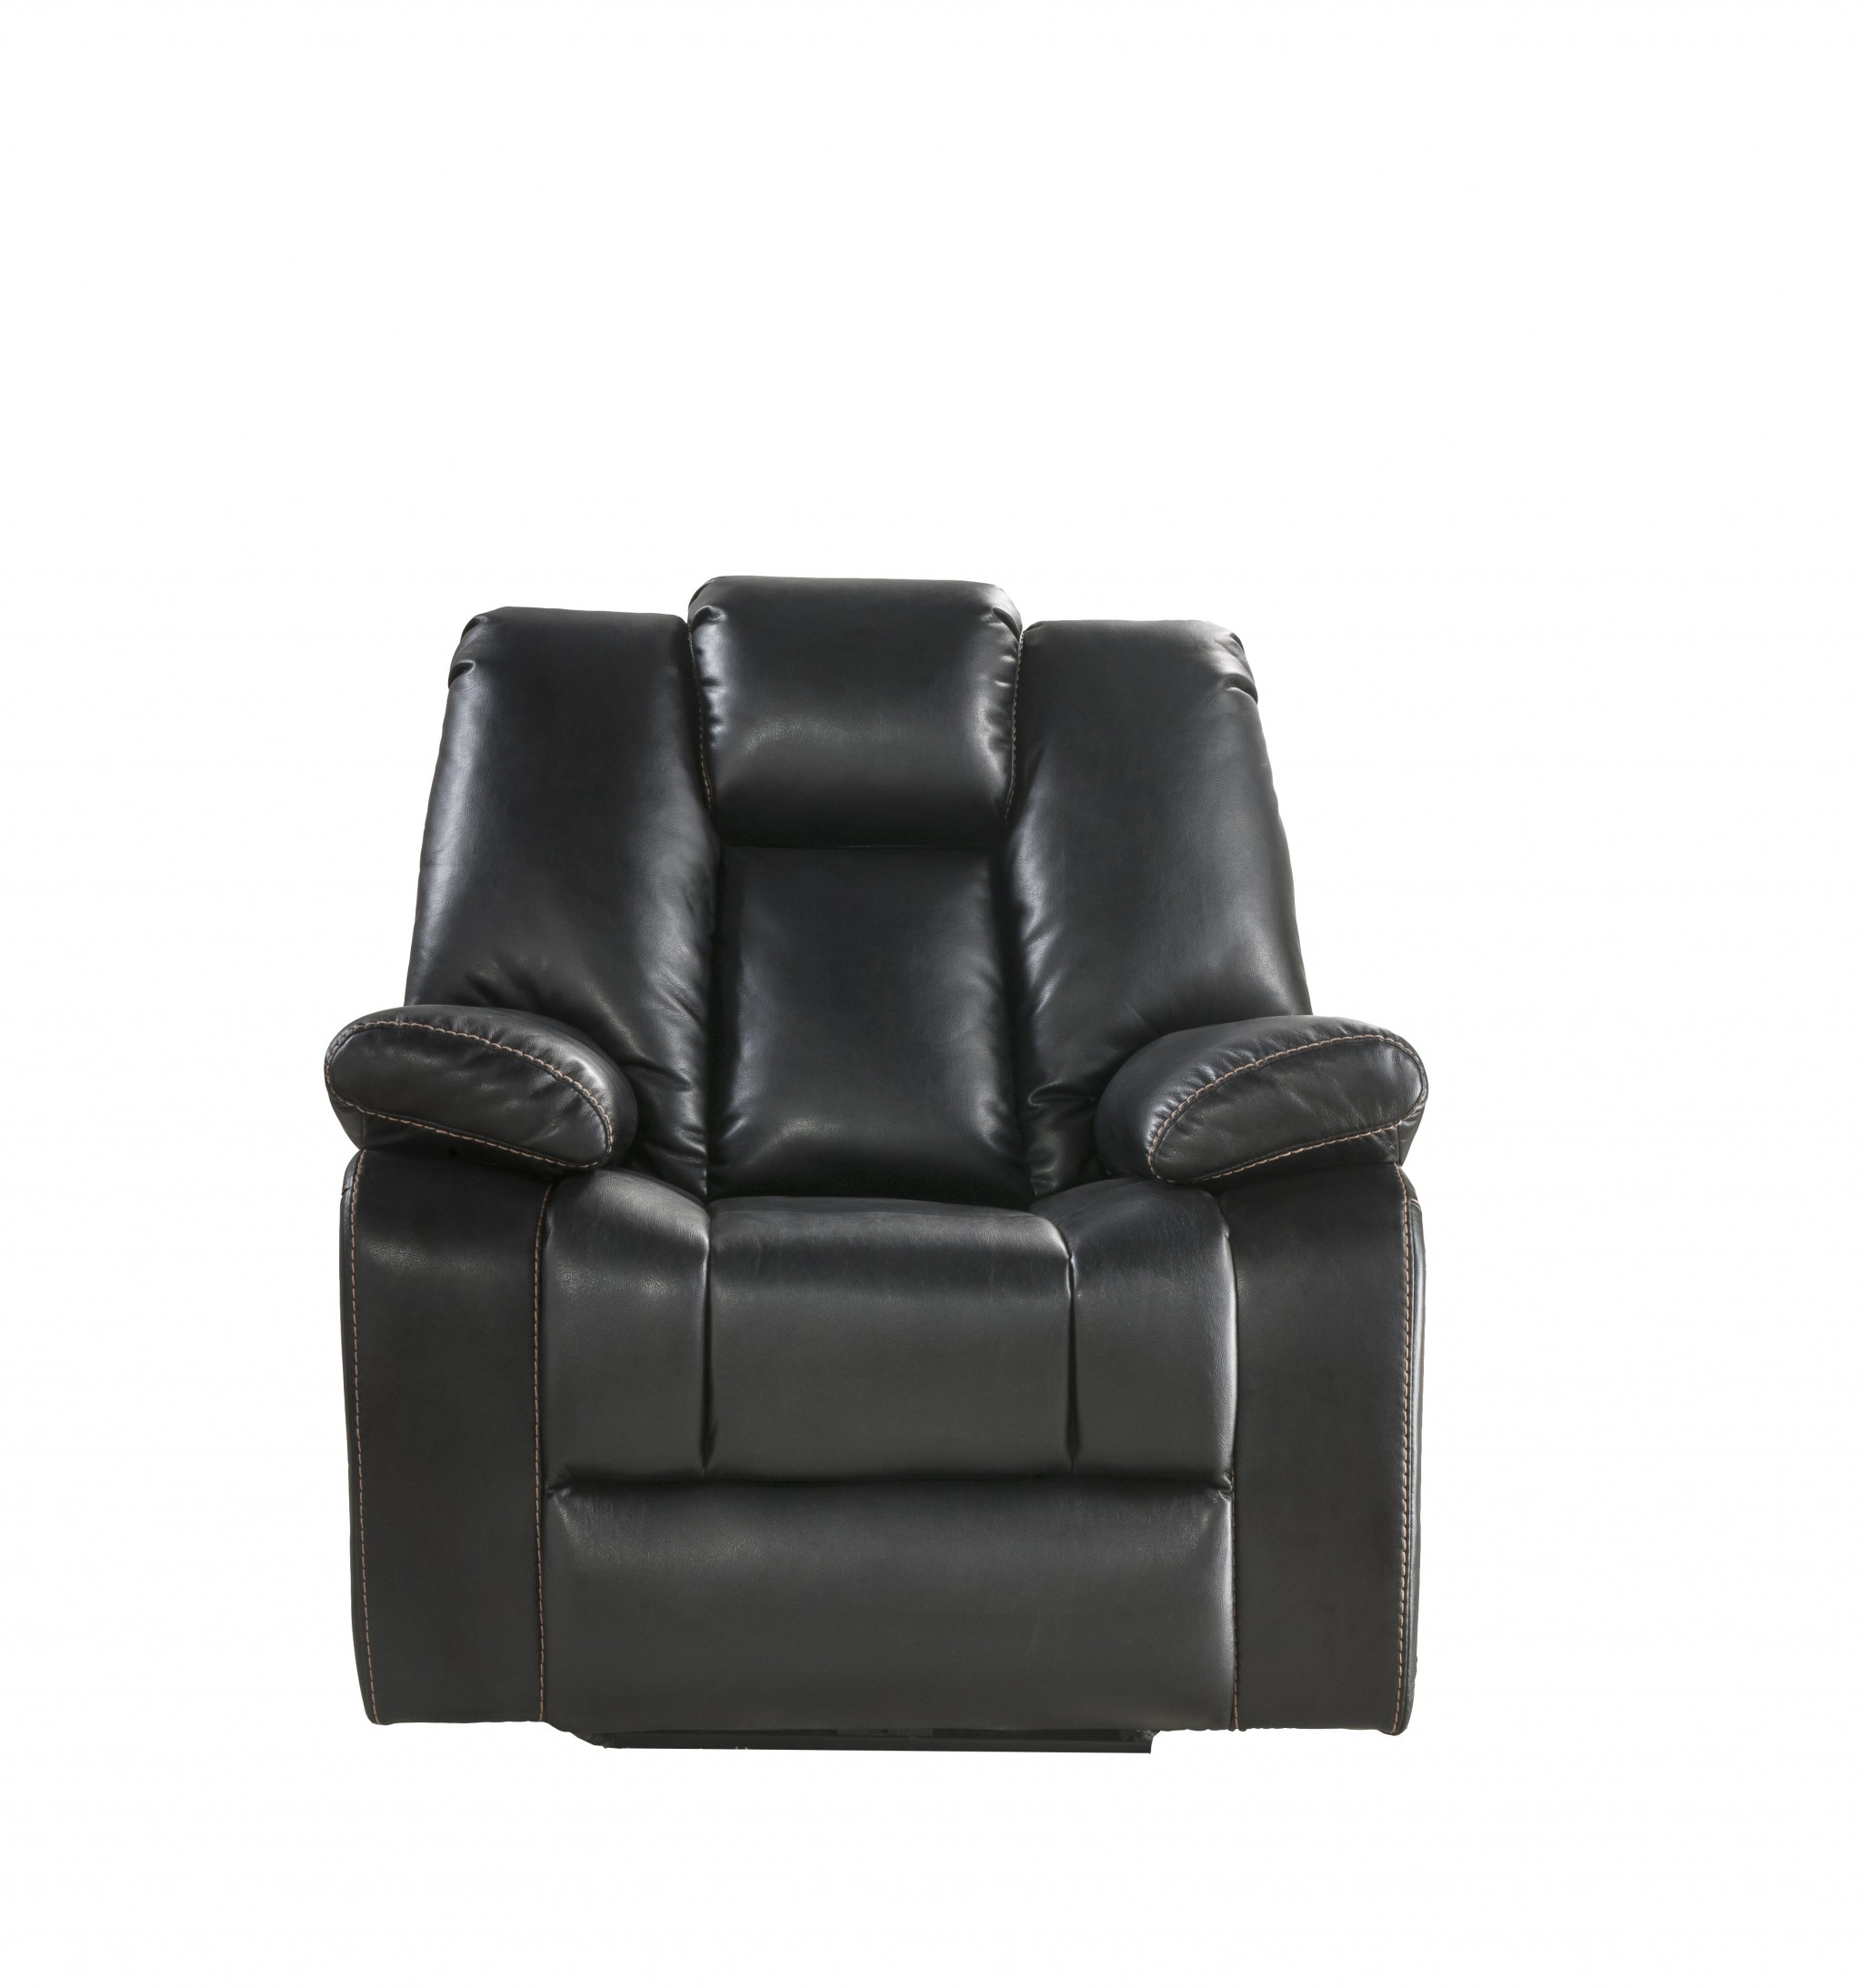 39" X 39" X 43" Black Leather-Aire Upholstery Recliner (Power Motion)